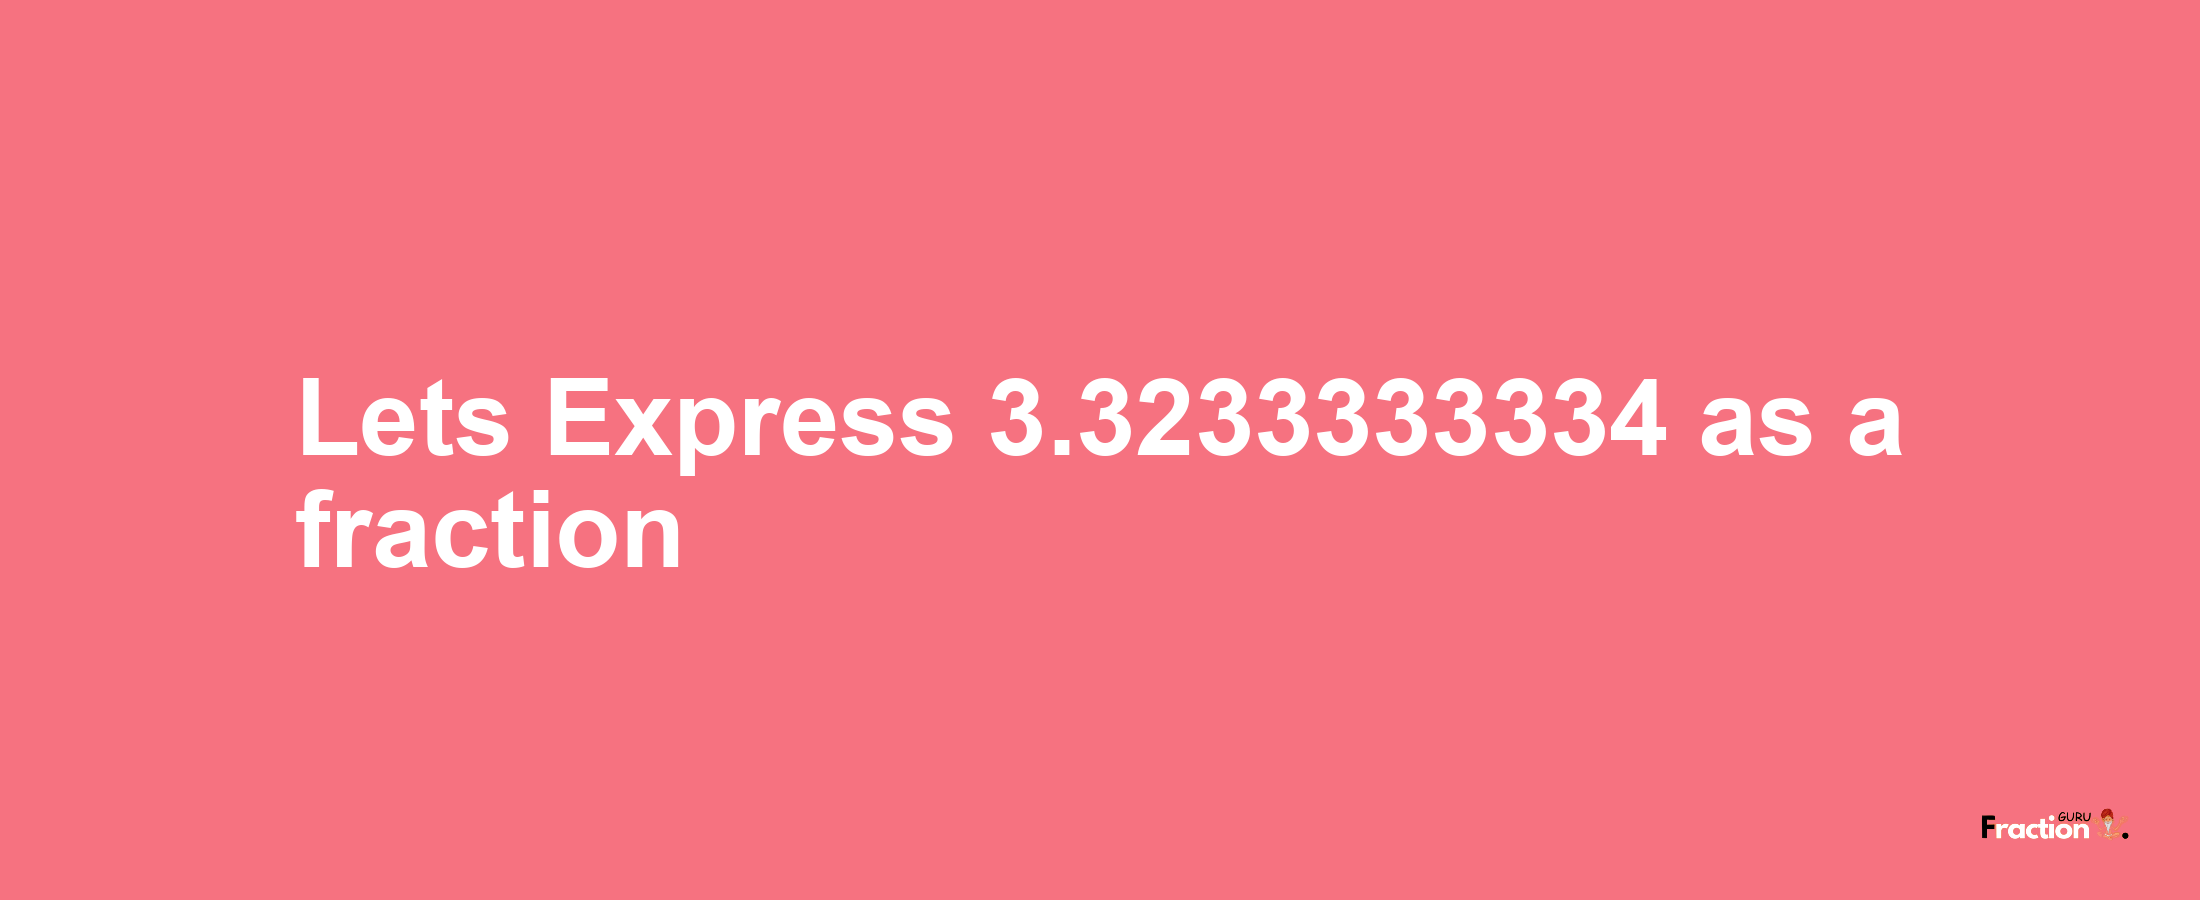 Lets Express 3.3233333334 as afraction